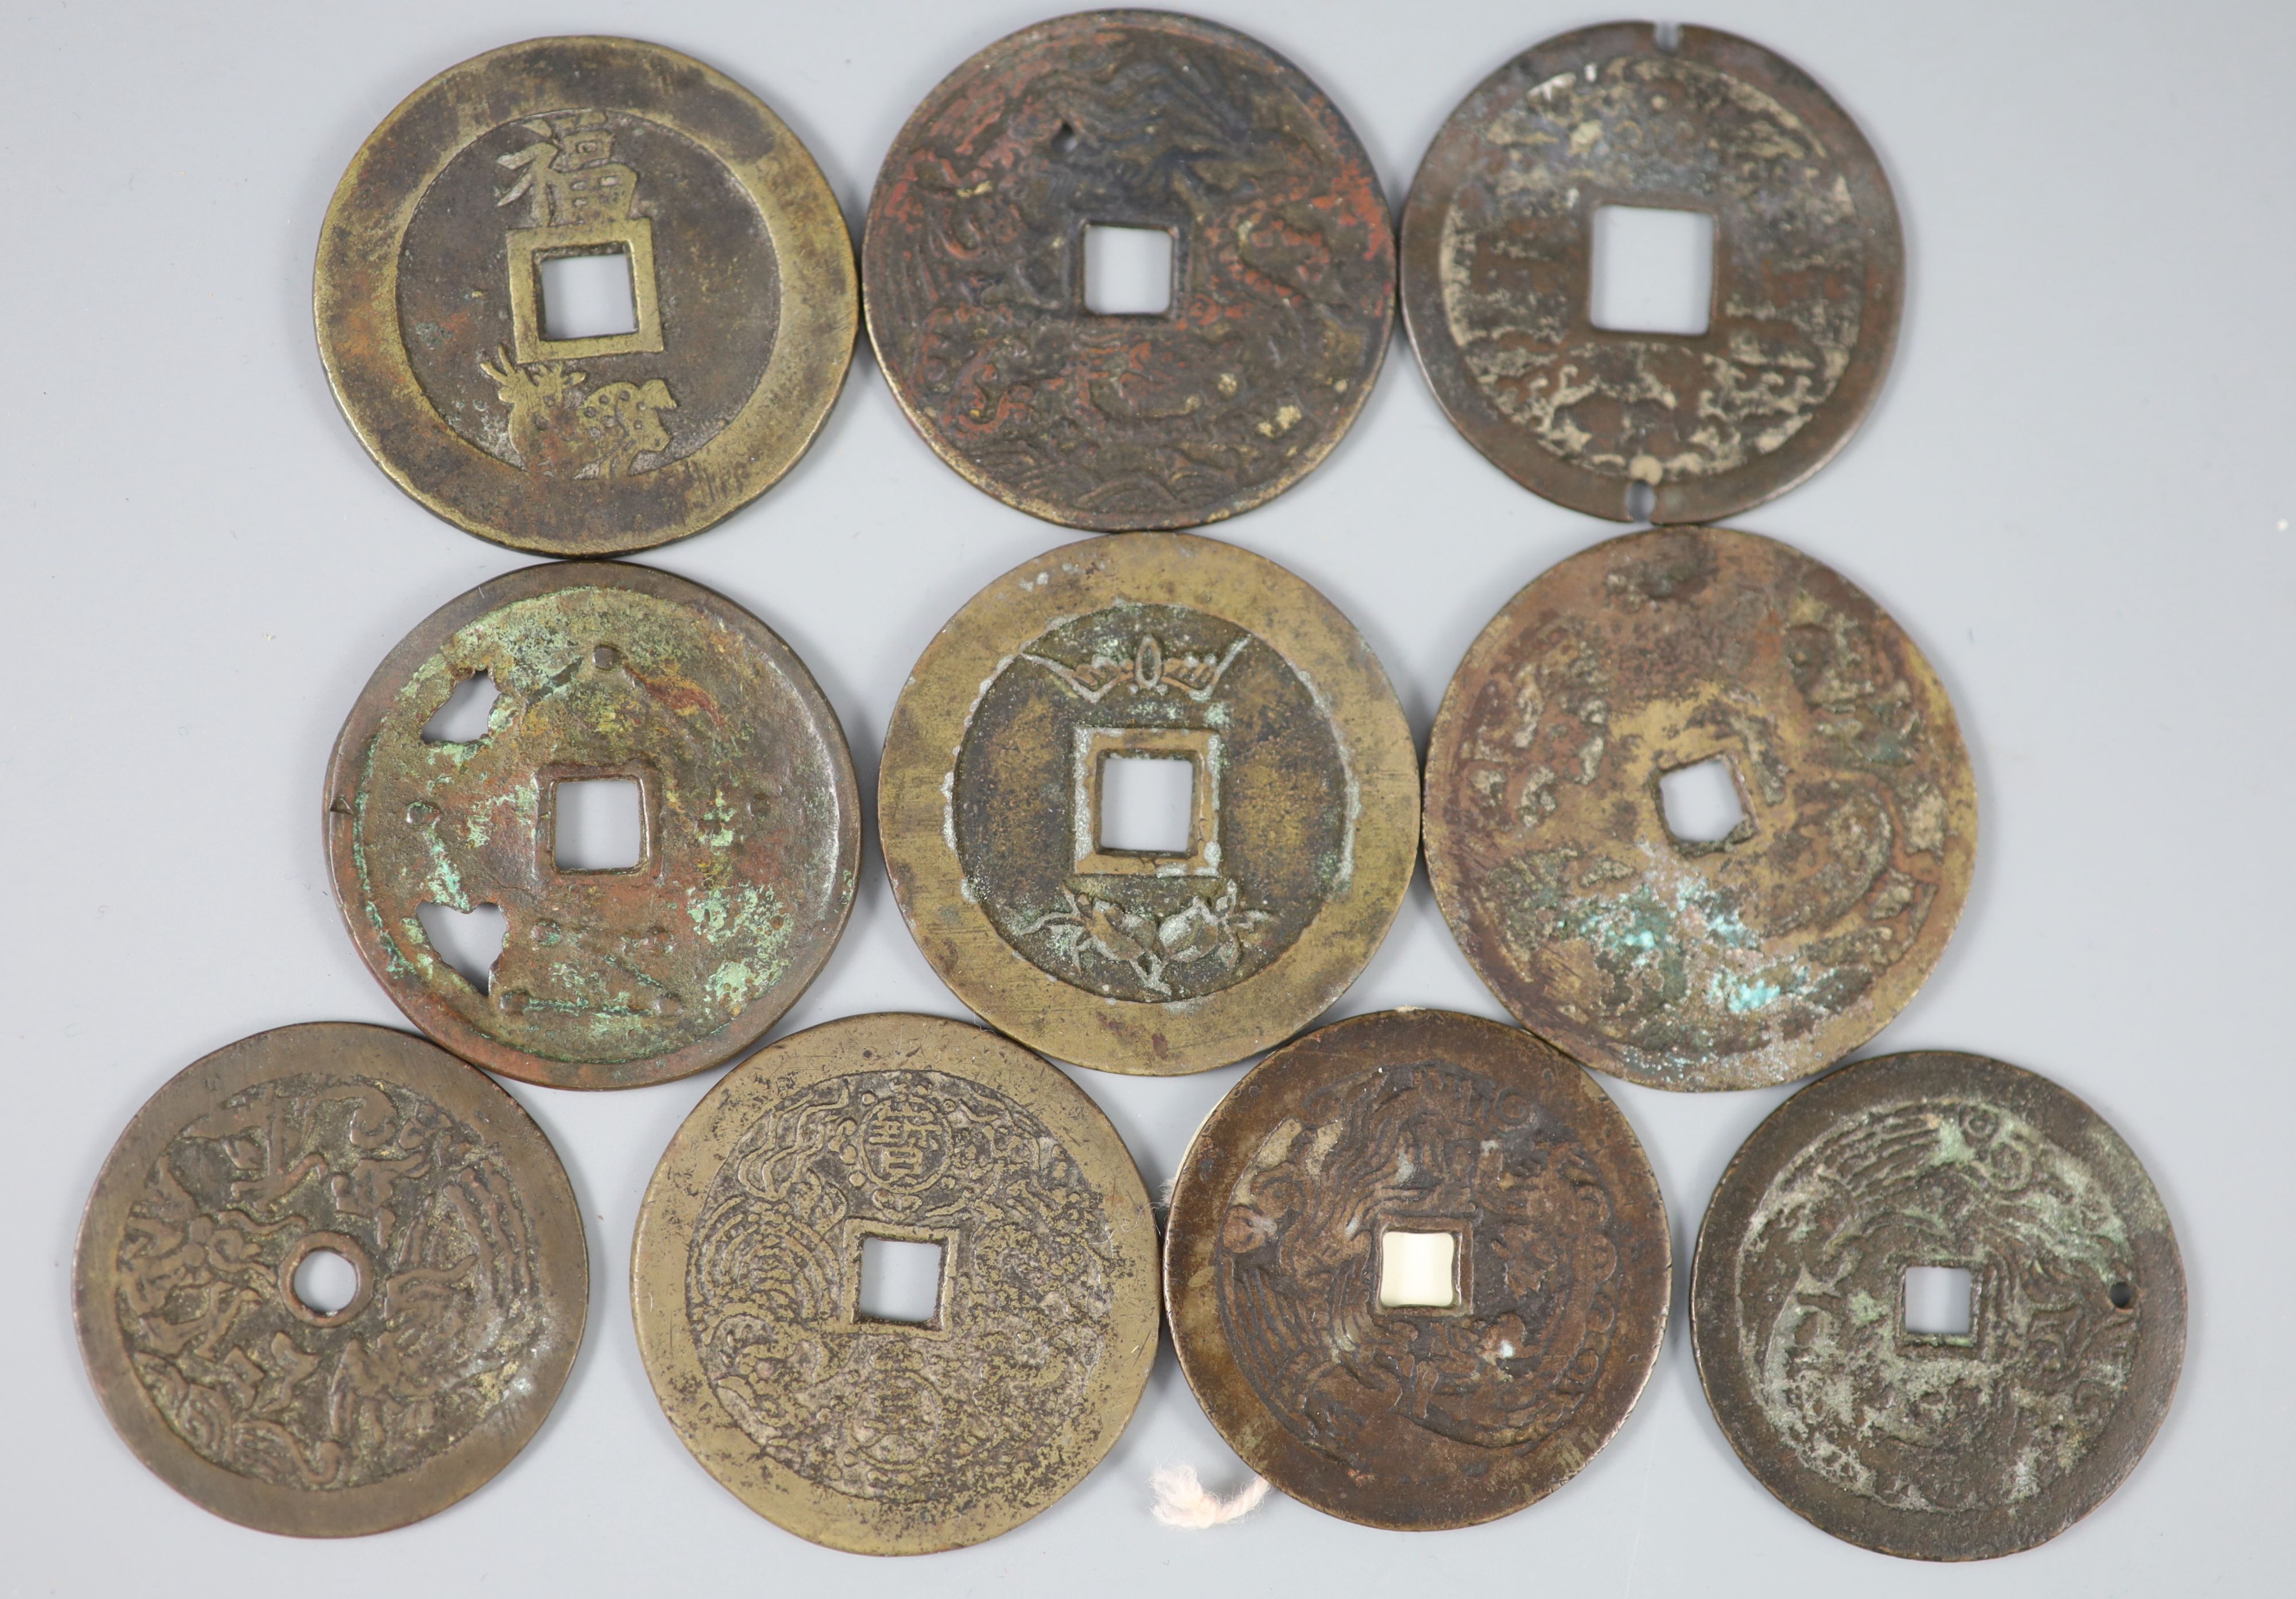 China, 10 bronze or copper charms or amulets, Qing dynasty, all with four character inscription - Image 2 of 2